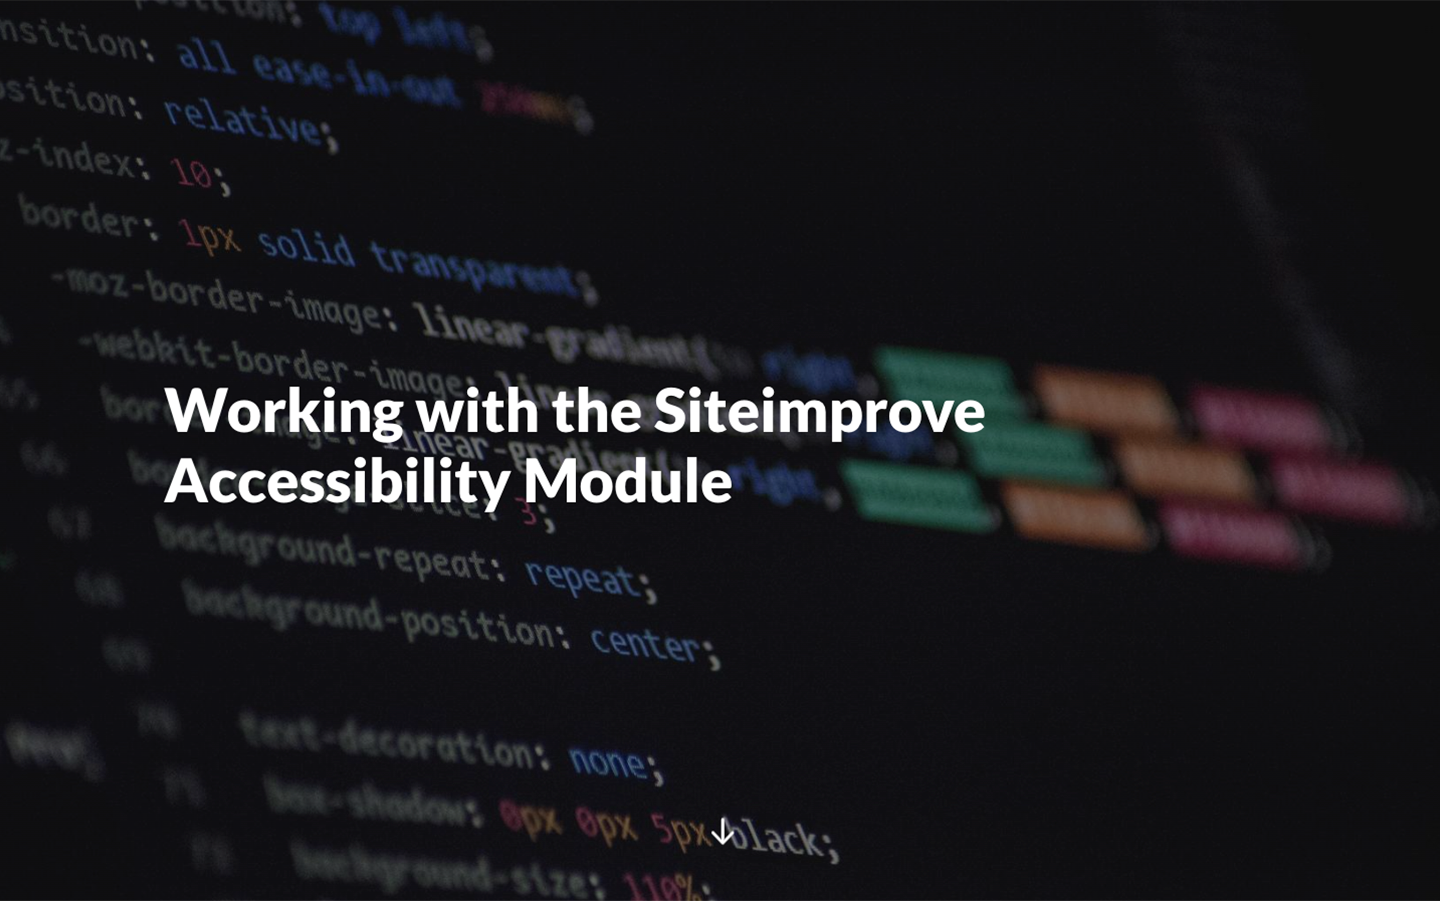 Working with the Siteimprove Accessibility Module